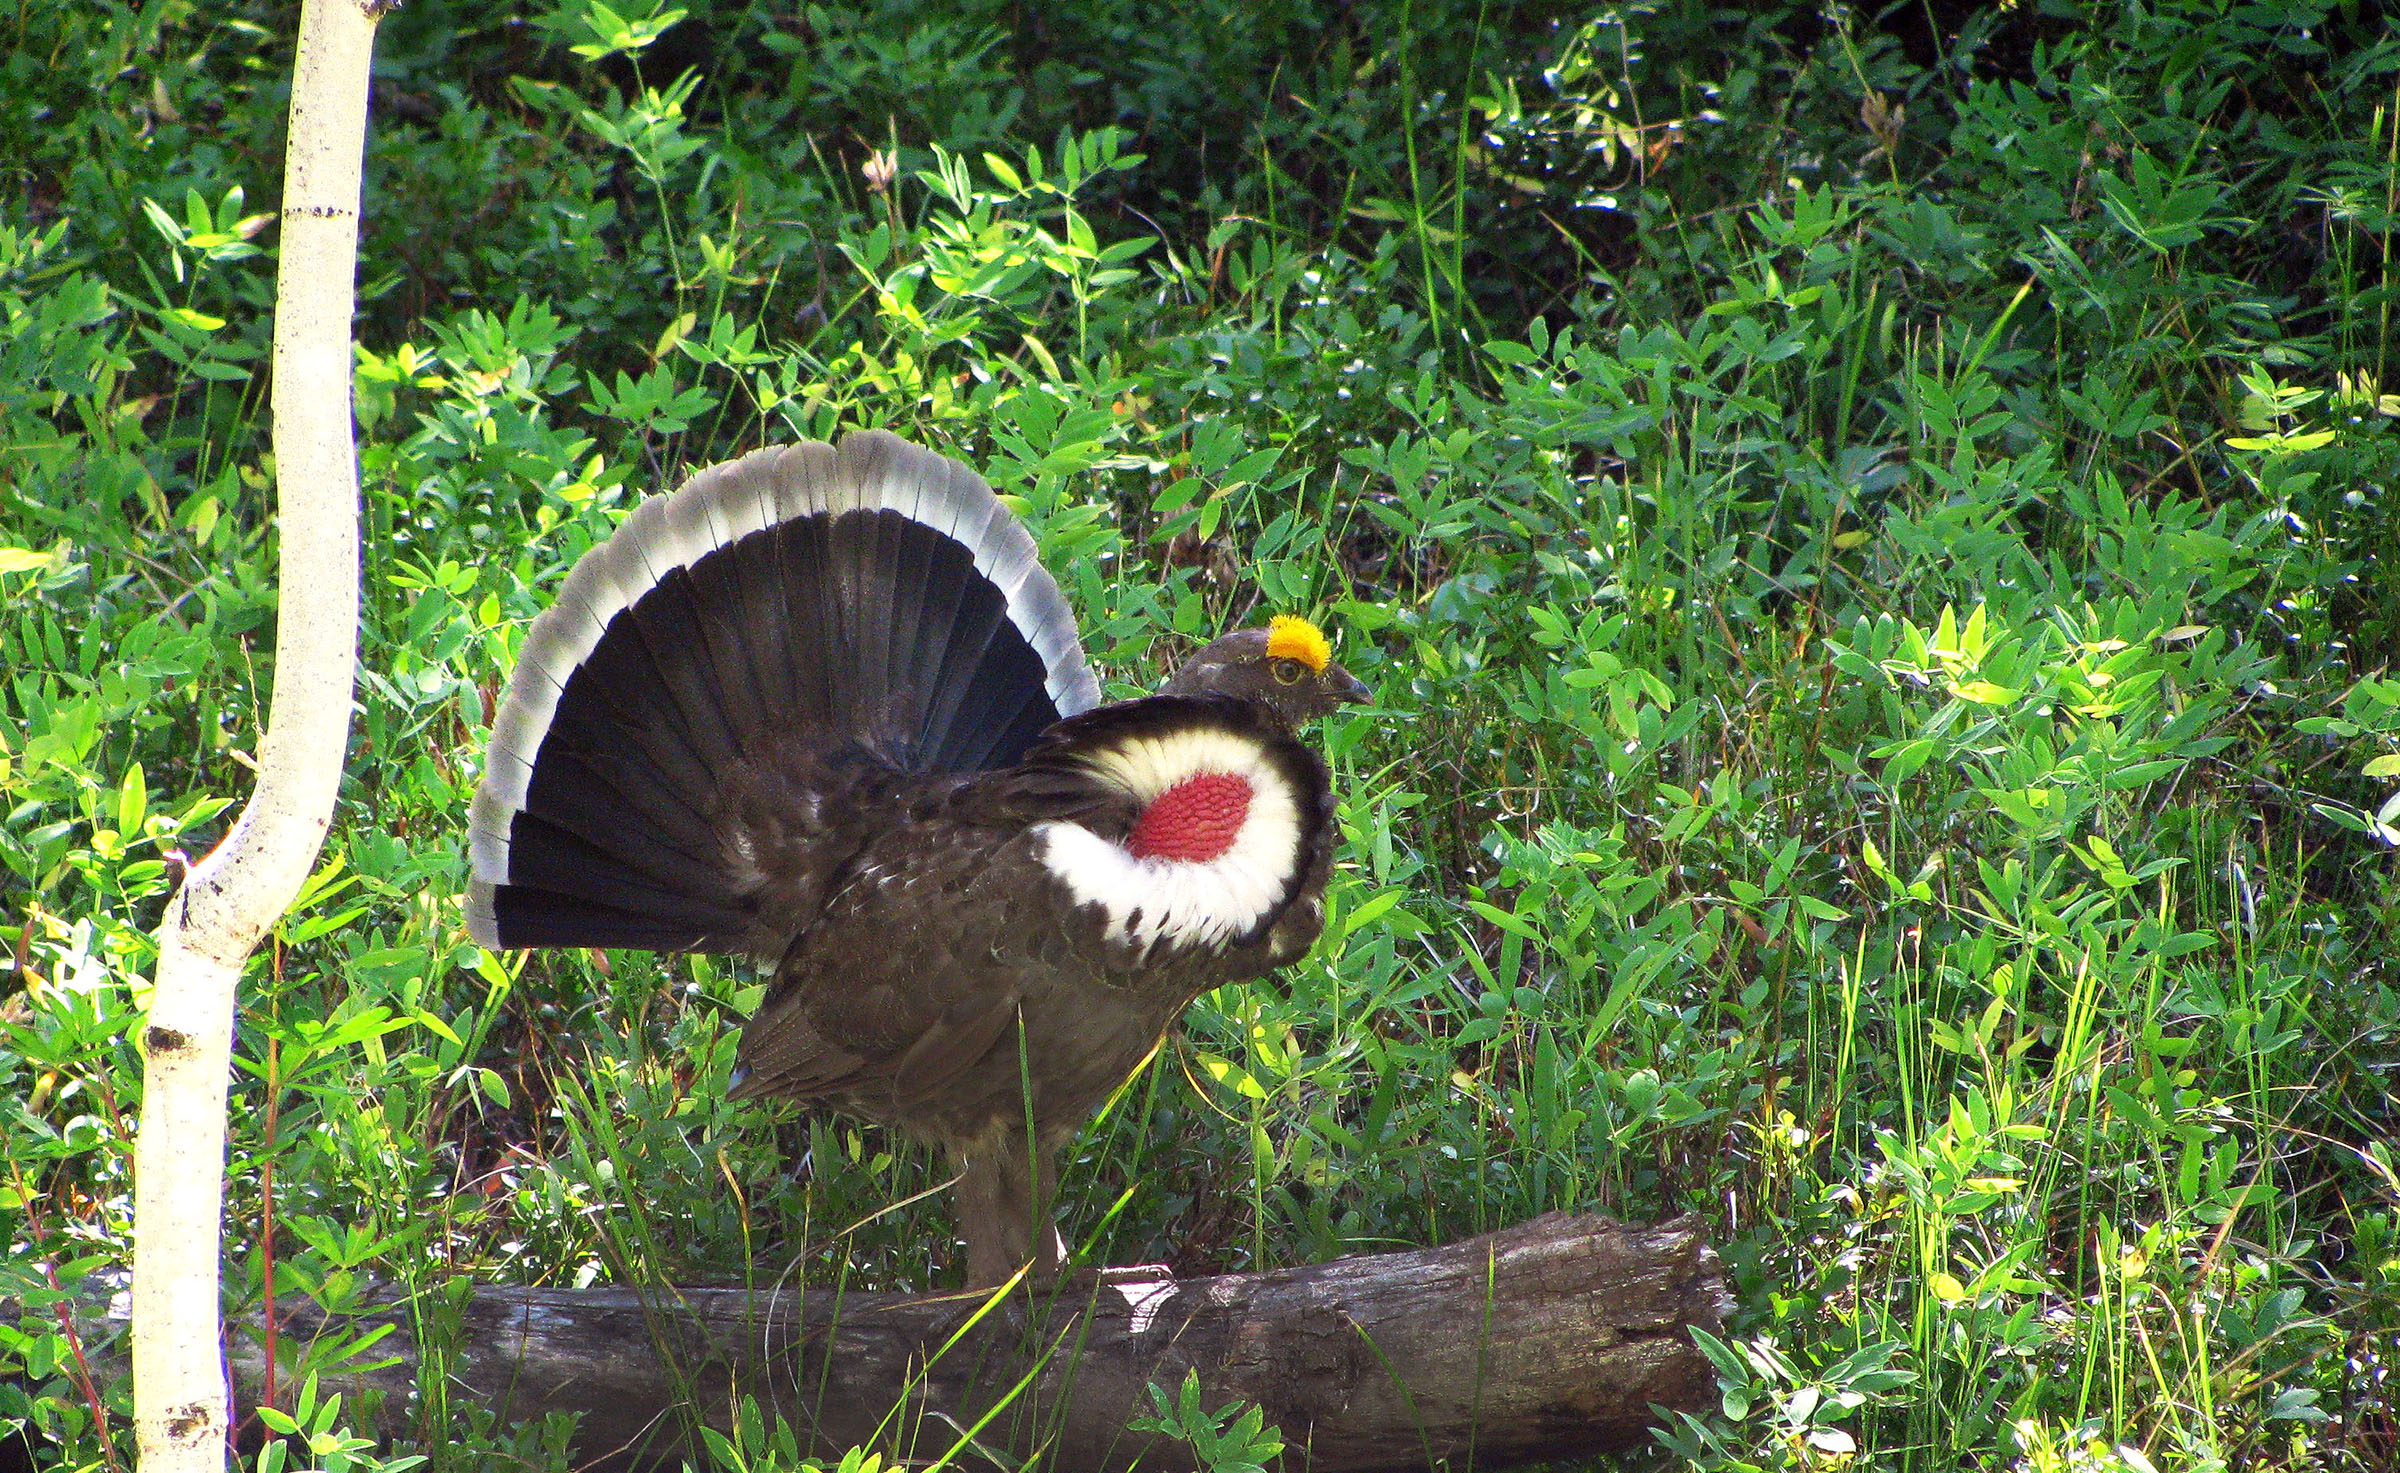 A male Dusky grouse in display mode on the Hunter Creek Cutoff.